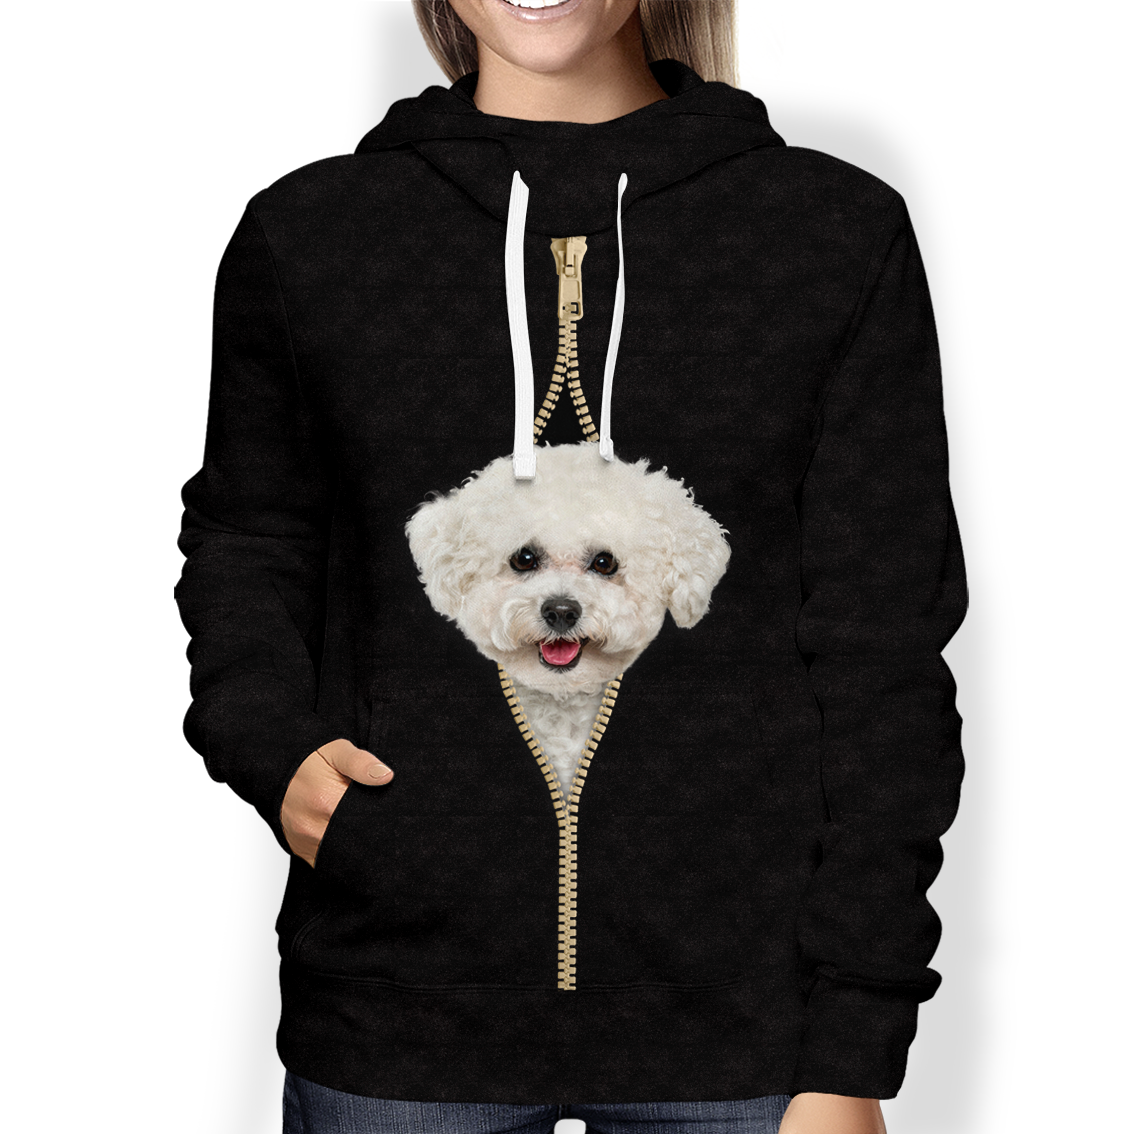 I'm With You - Bichon Frise Hoodie V2